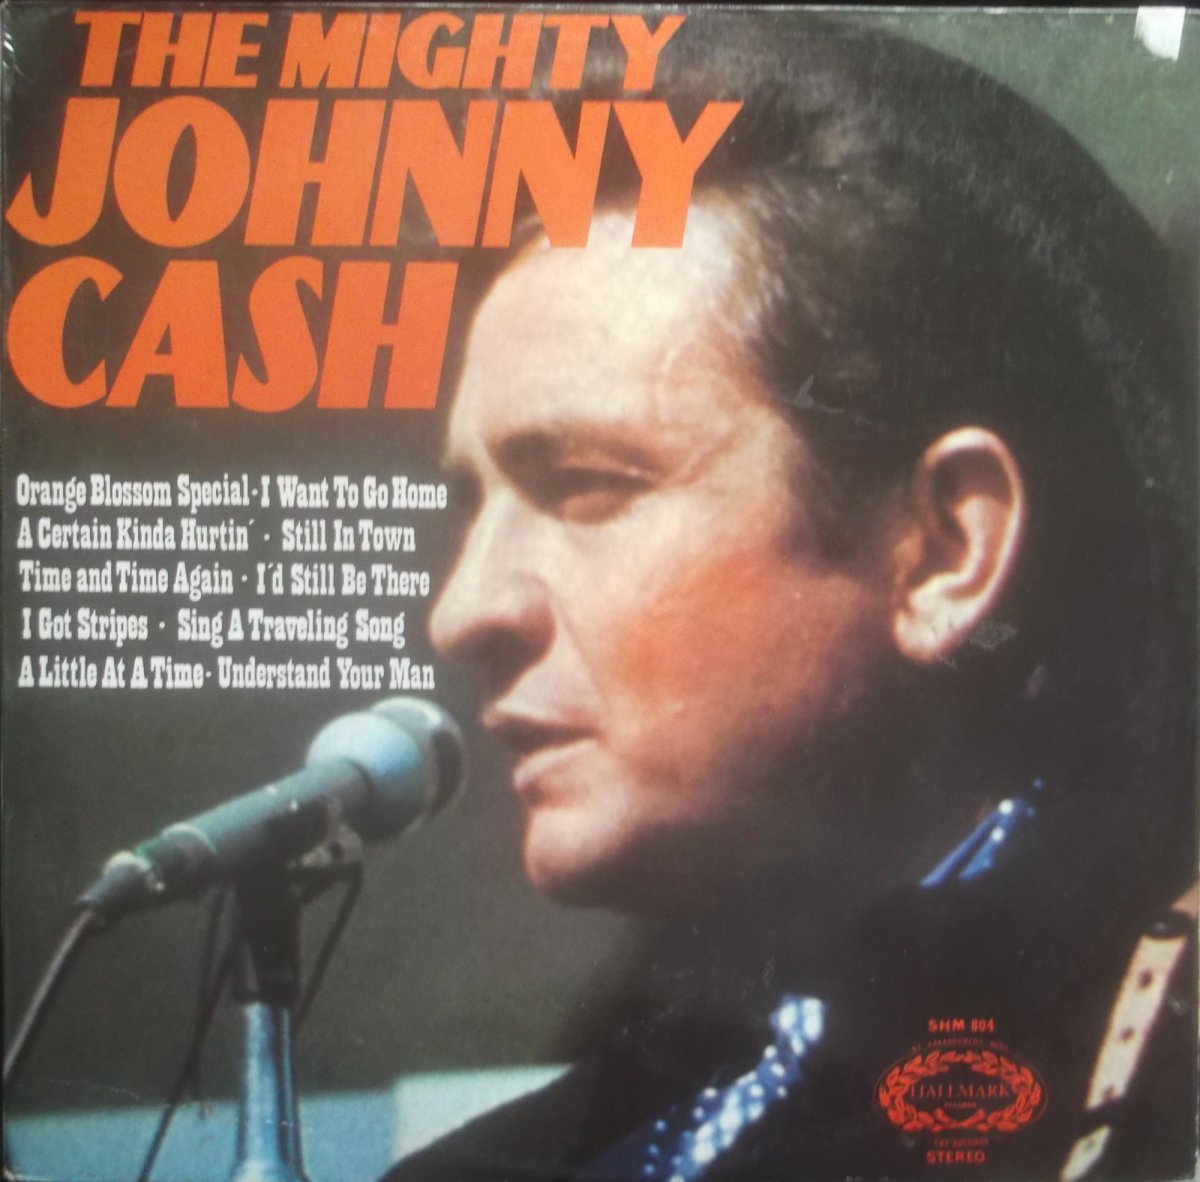 Johnny Cash – The Mighty Johnny Cash